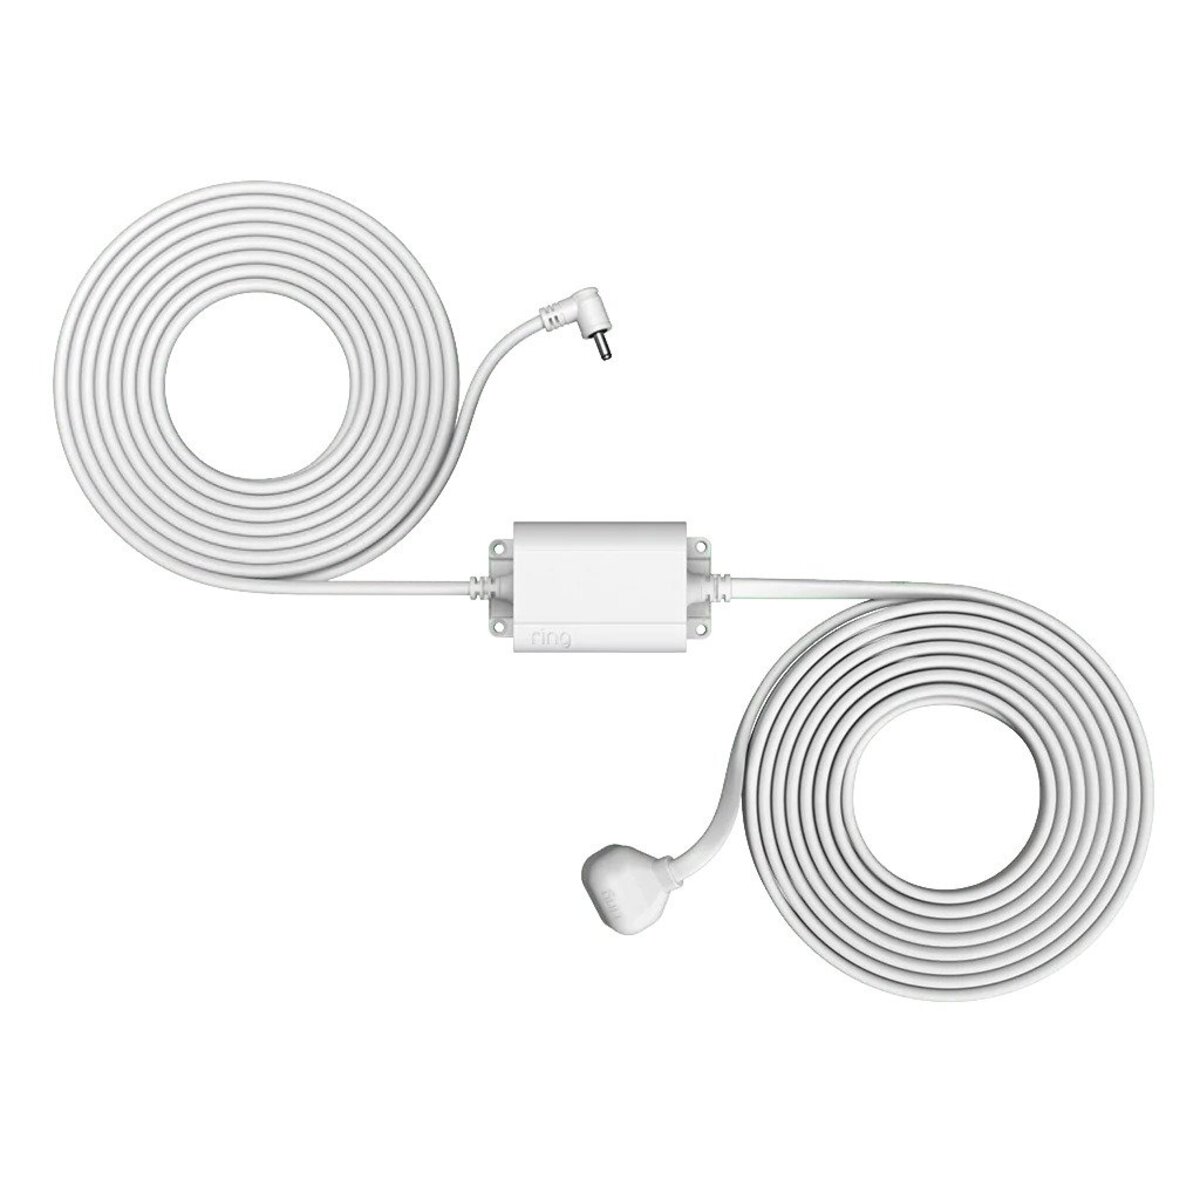 Ring Power Adapter Plug Indoor/outdoor -White